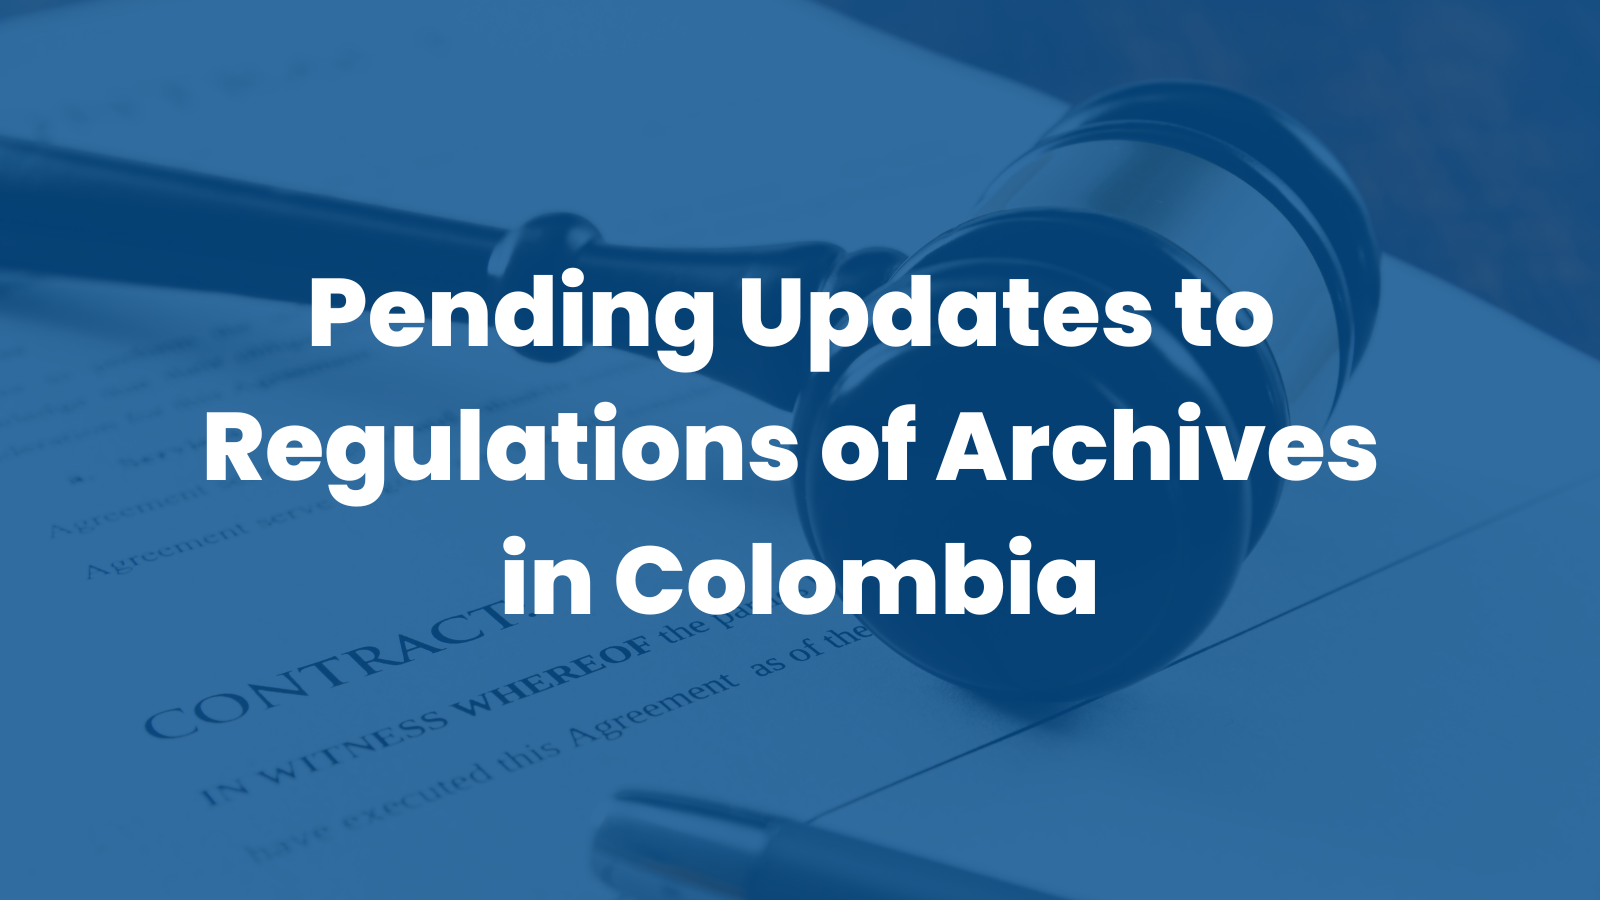 Pending Updates to Regulations of Archives in Colombia